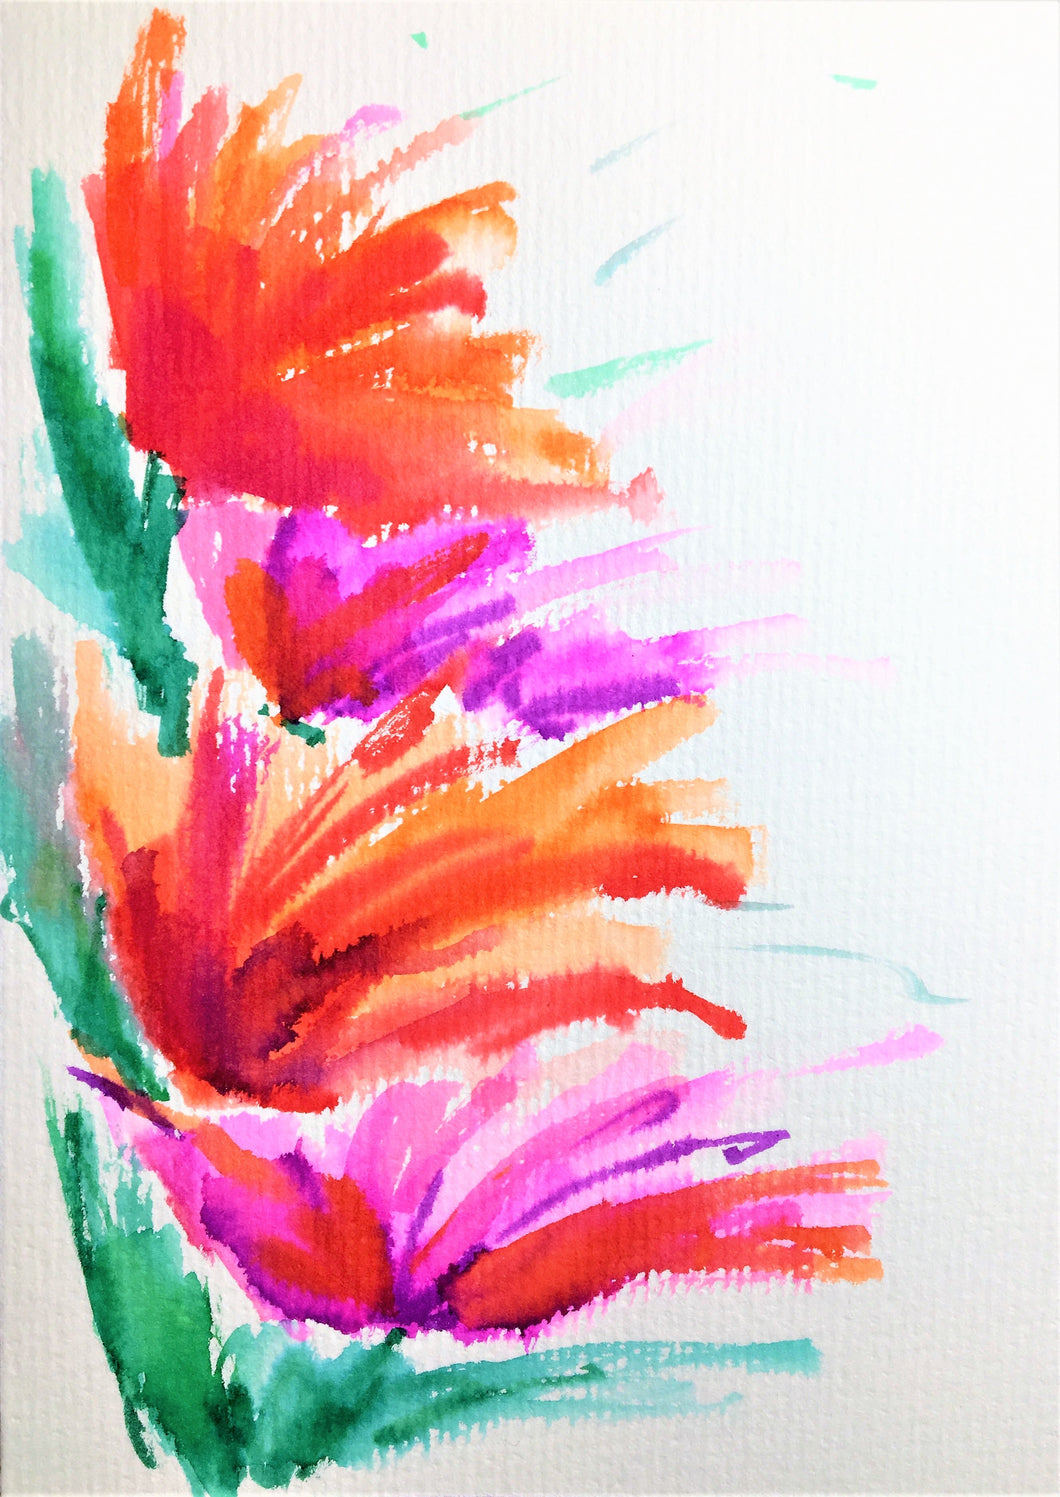 Hand-painted greeting card - Red, orange, pink and purple abstract flowers design - eDgE dEsiGn London